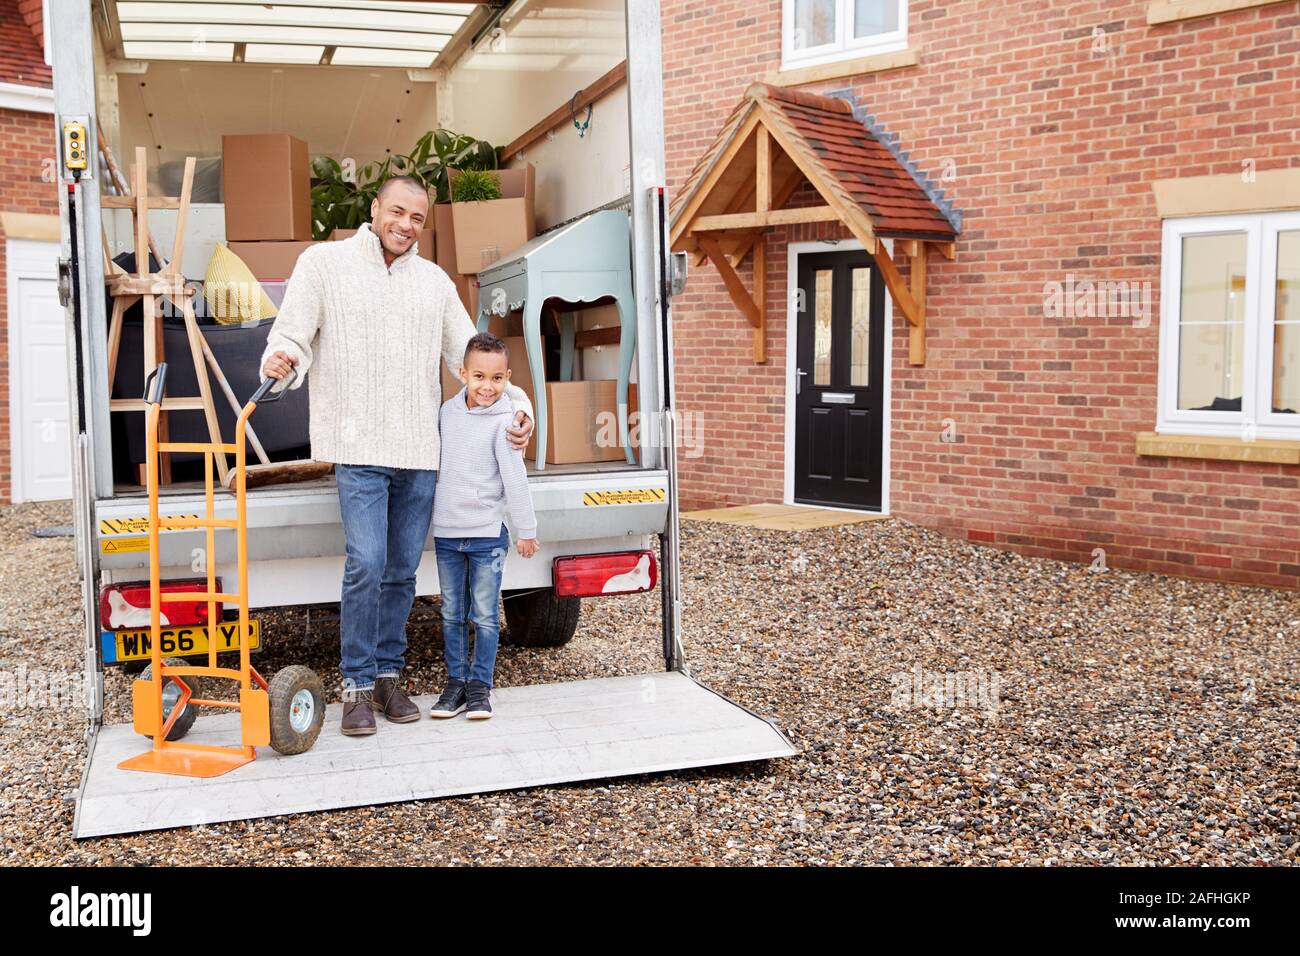 Portrait Of Father And Son Unloading Furniture From Removal Truck Into New Home Stock Photo